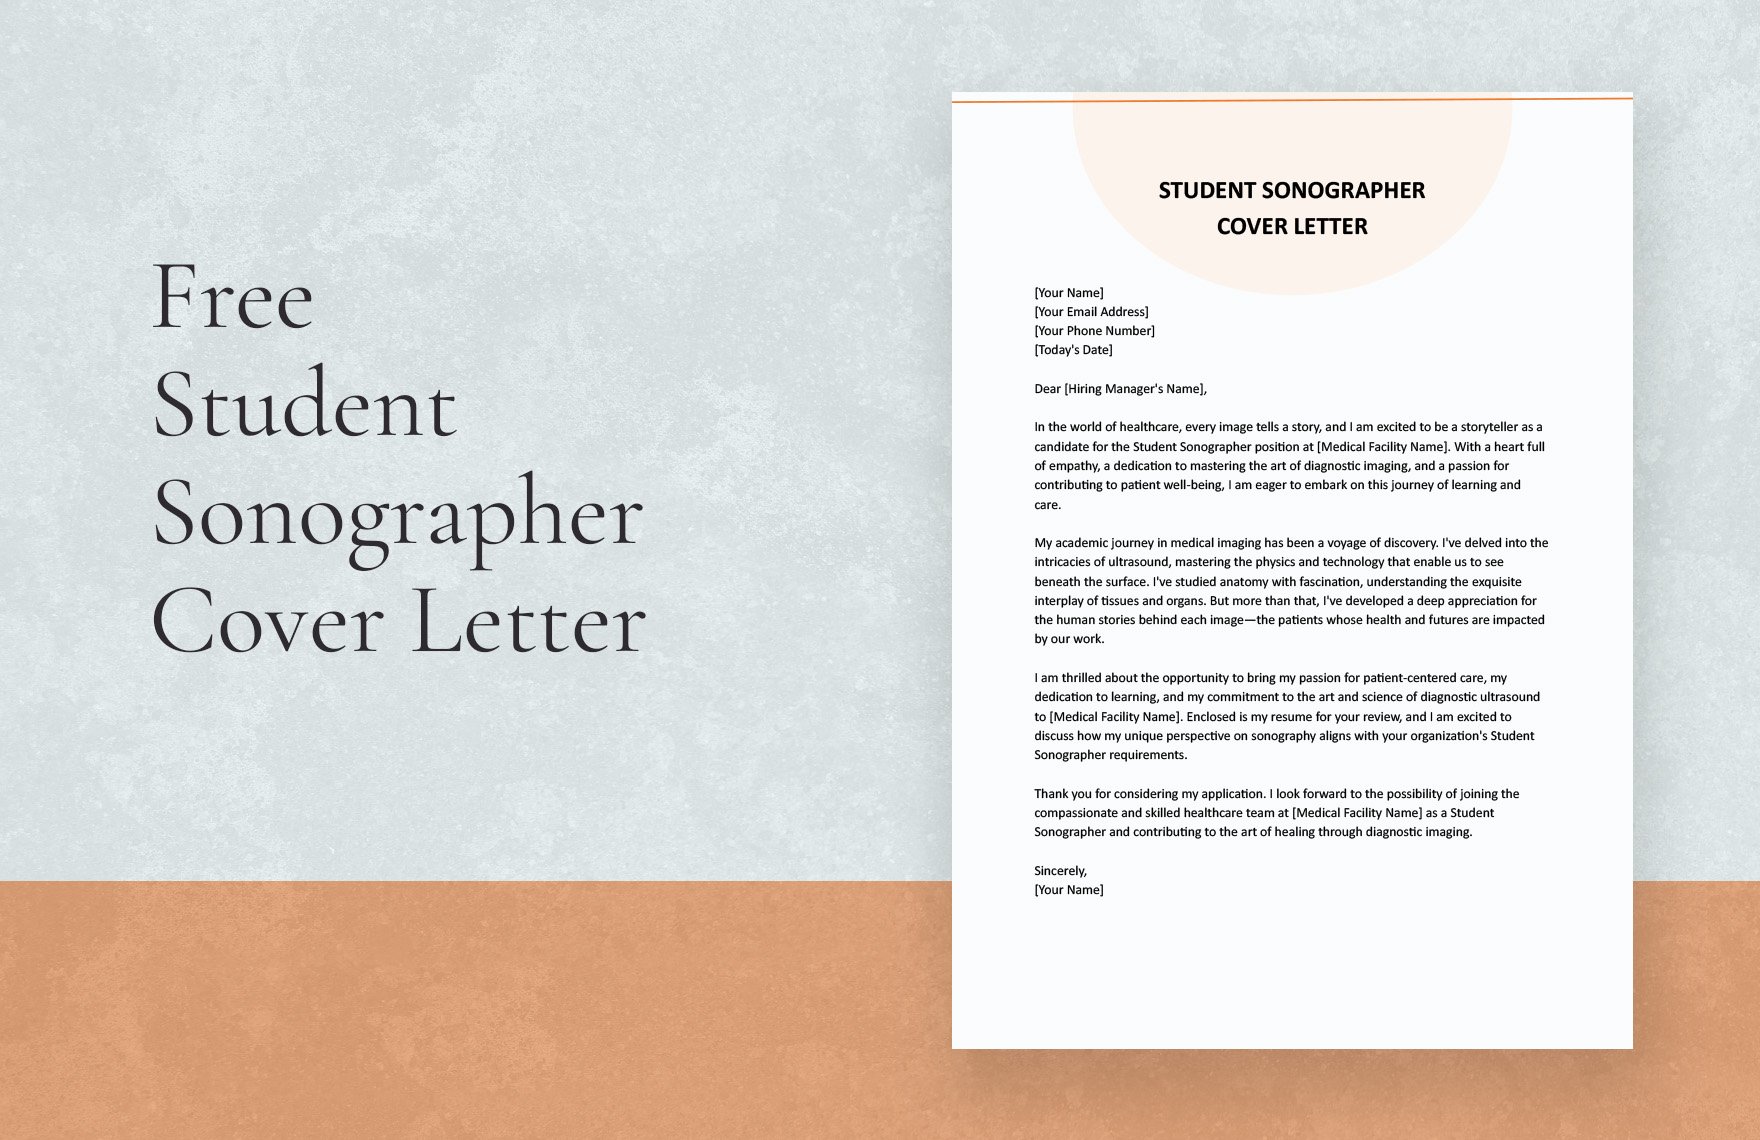 Student Sonographer Cover Letter in Word, Google Docs